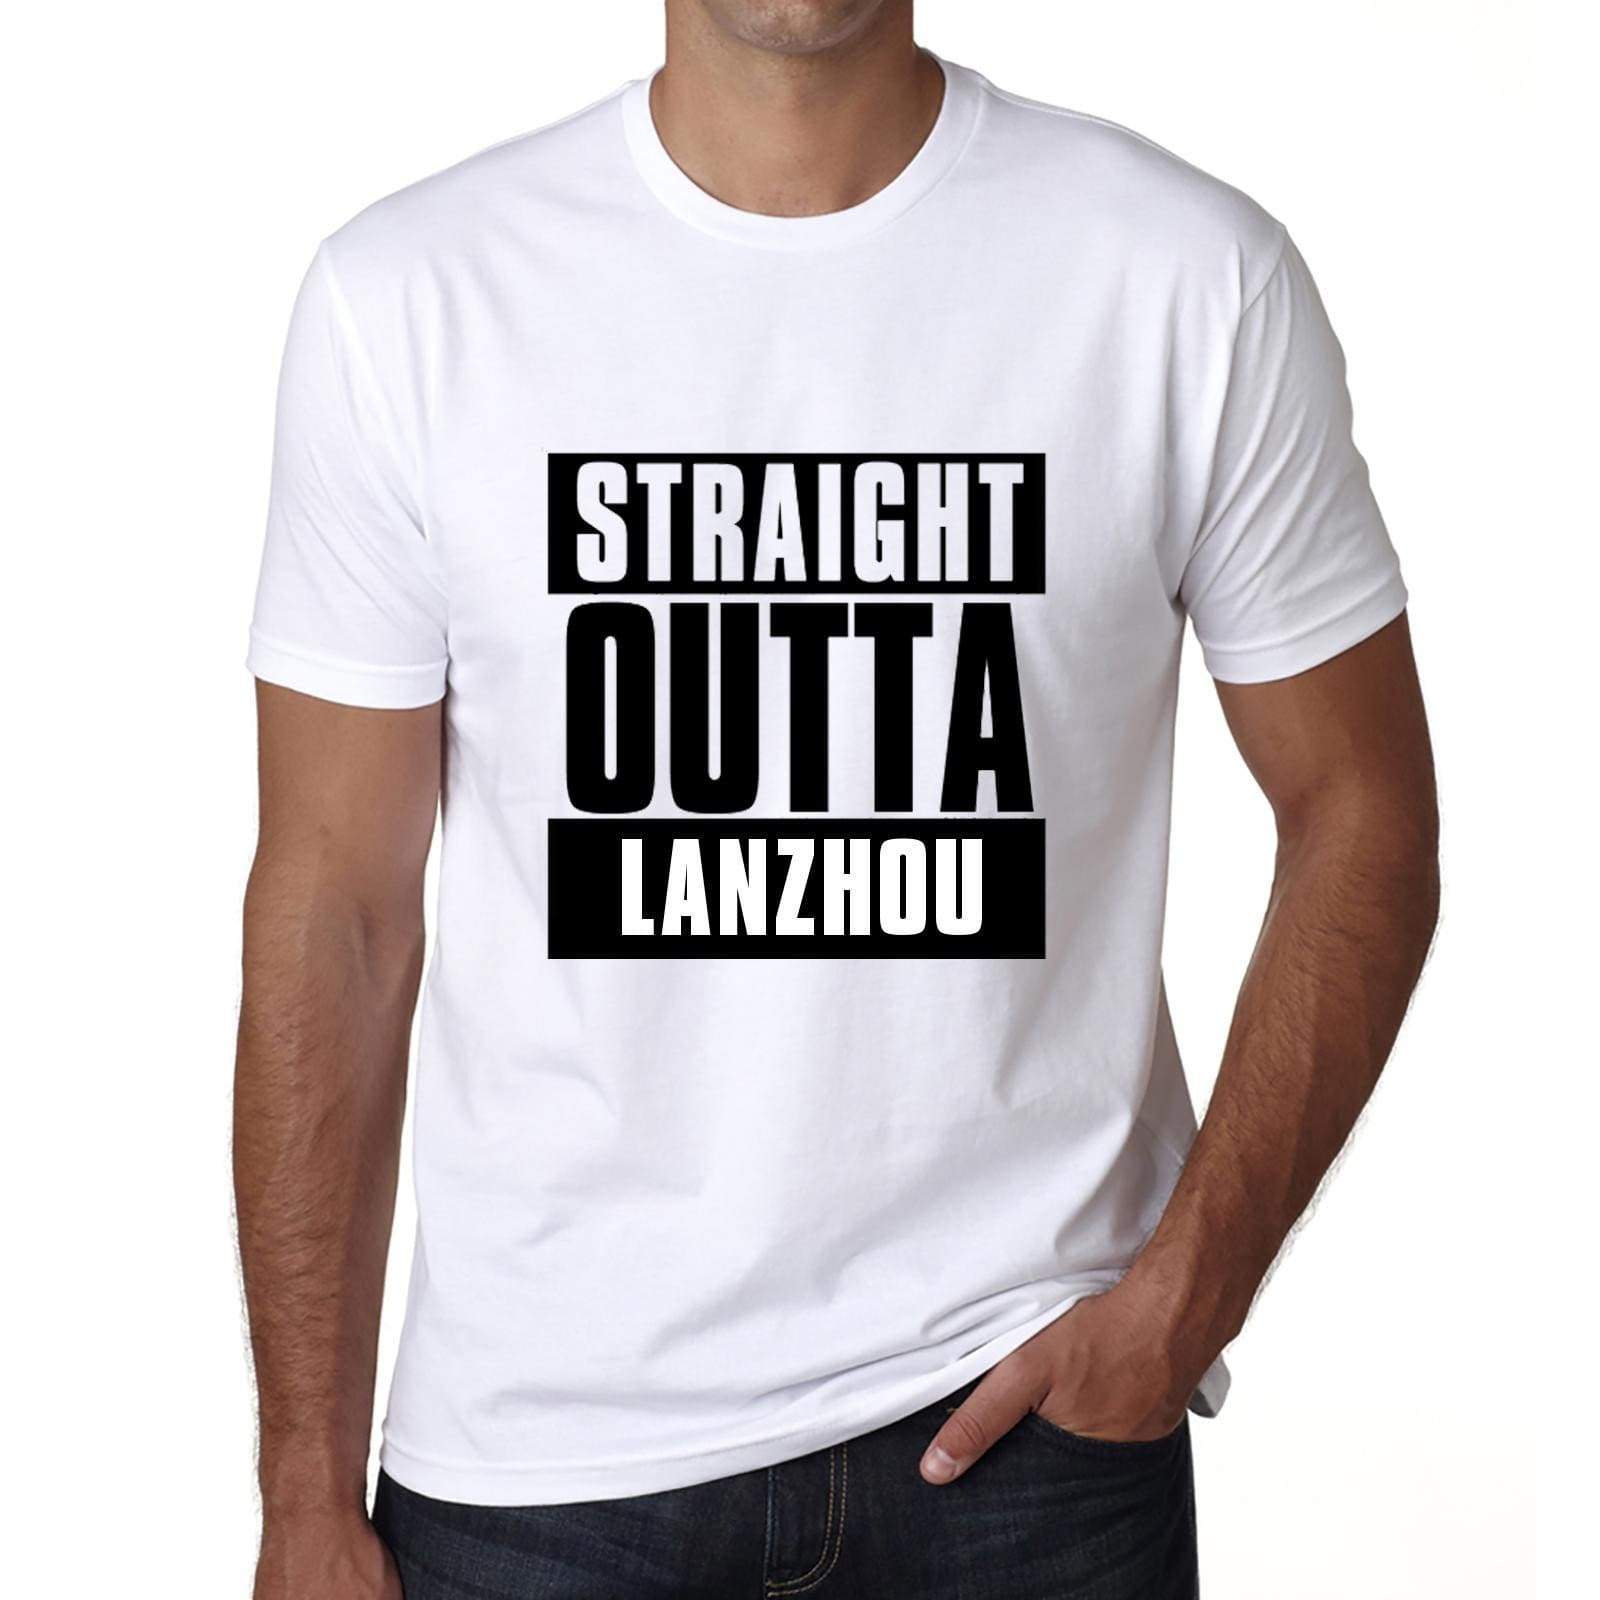 Straight Outta Lanzhou Mens Short Sleeve Round Neck T-Shirt 00027 - White / S - Casual